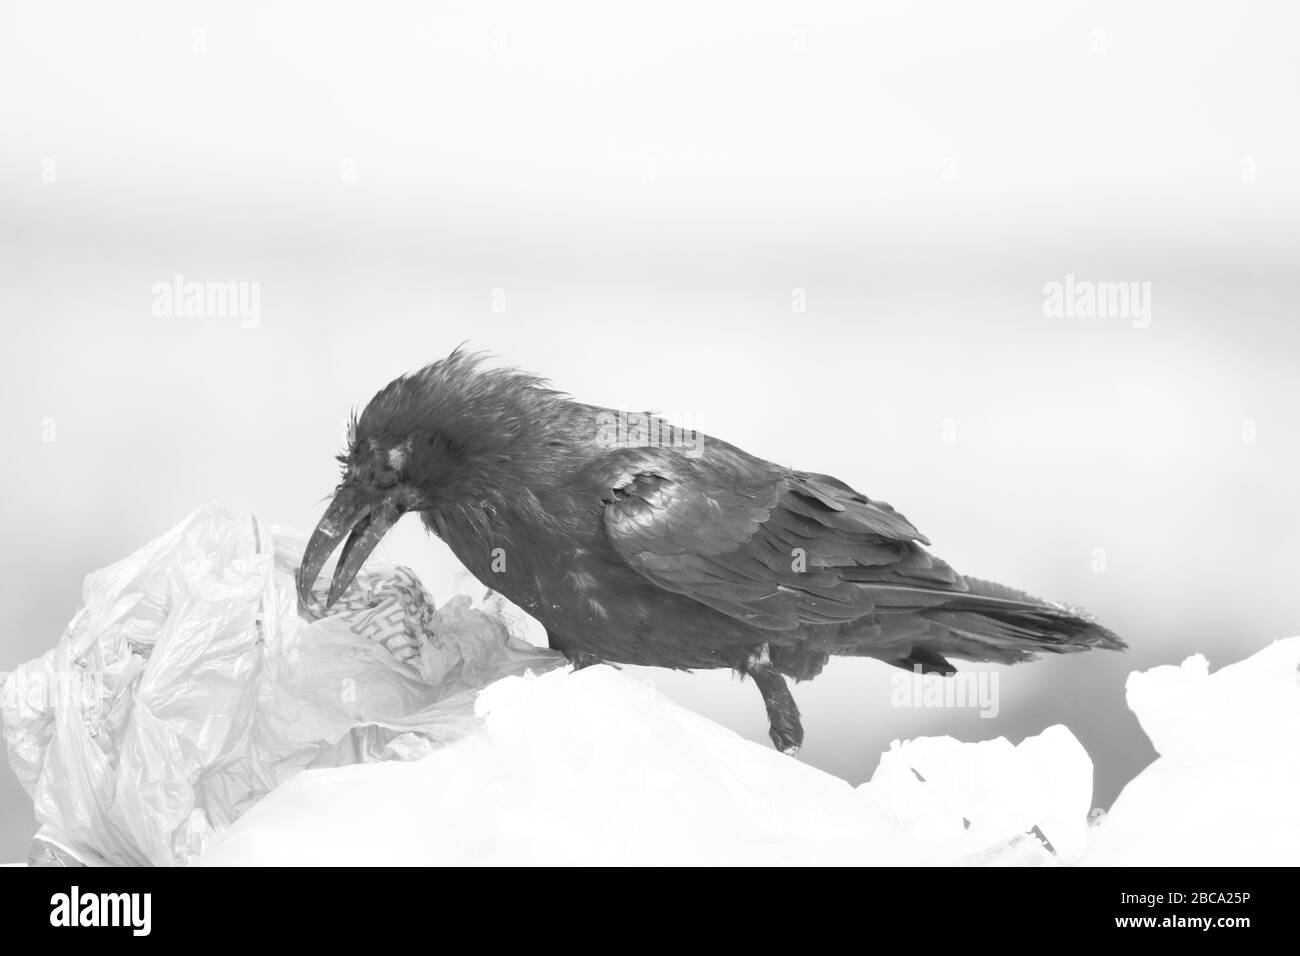 Common raven is eating food waste wrapped on plastic bags in a rubbish dump Stock Photo